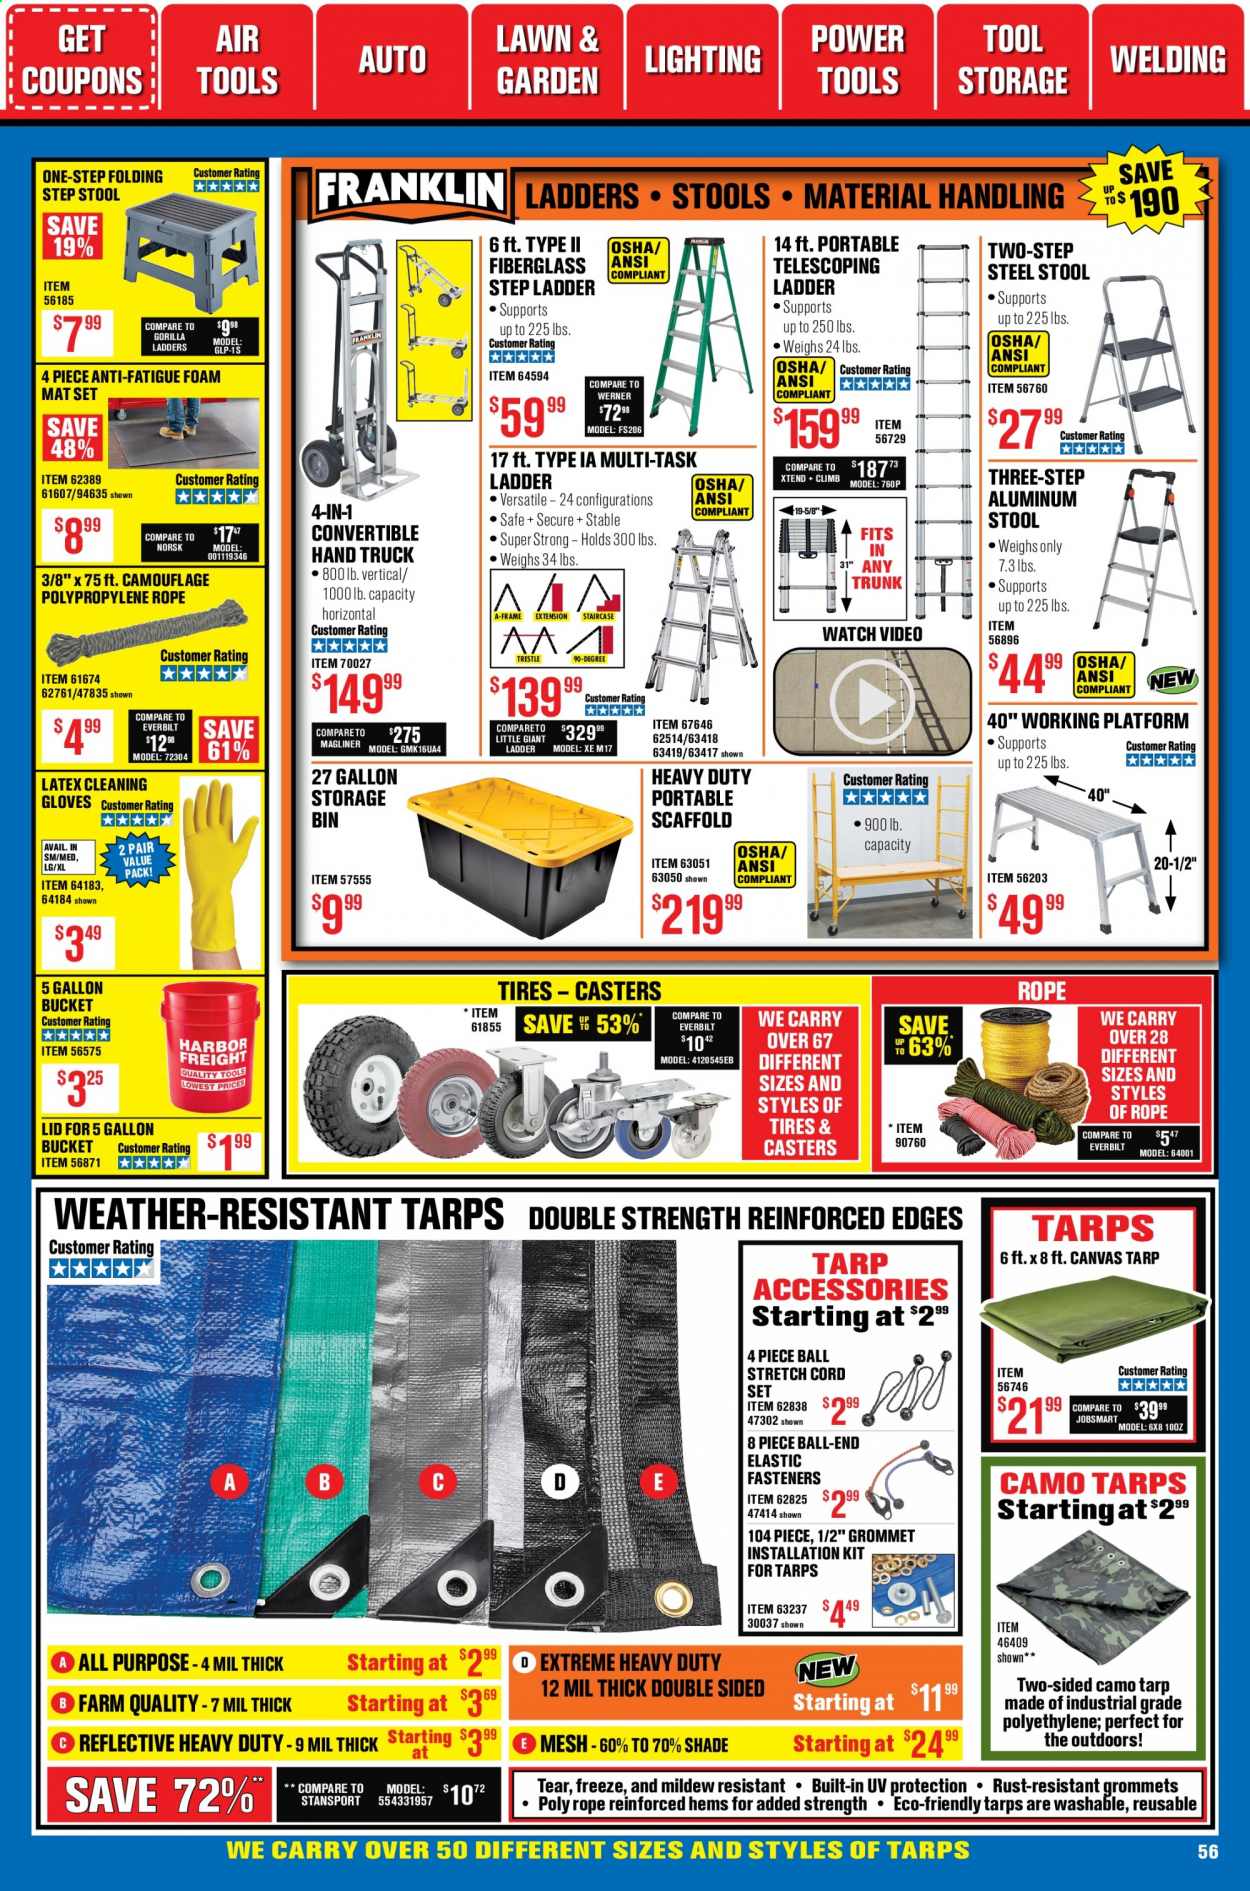 thumbnail - Harbor Freight Flyer - 01/01/2021 - 01/28/2021 - Sales products - tarps, ladder, step stool, anti-fatigue foam, power tools, gloves, cord set, storage bin, hand truck, weather-resistant tarp, tires. Page 56.